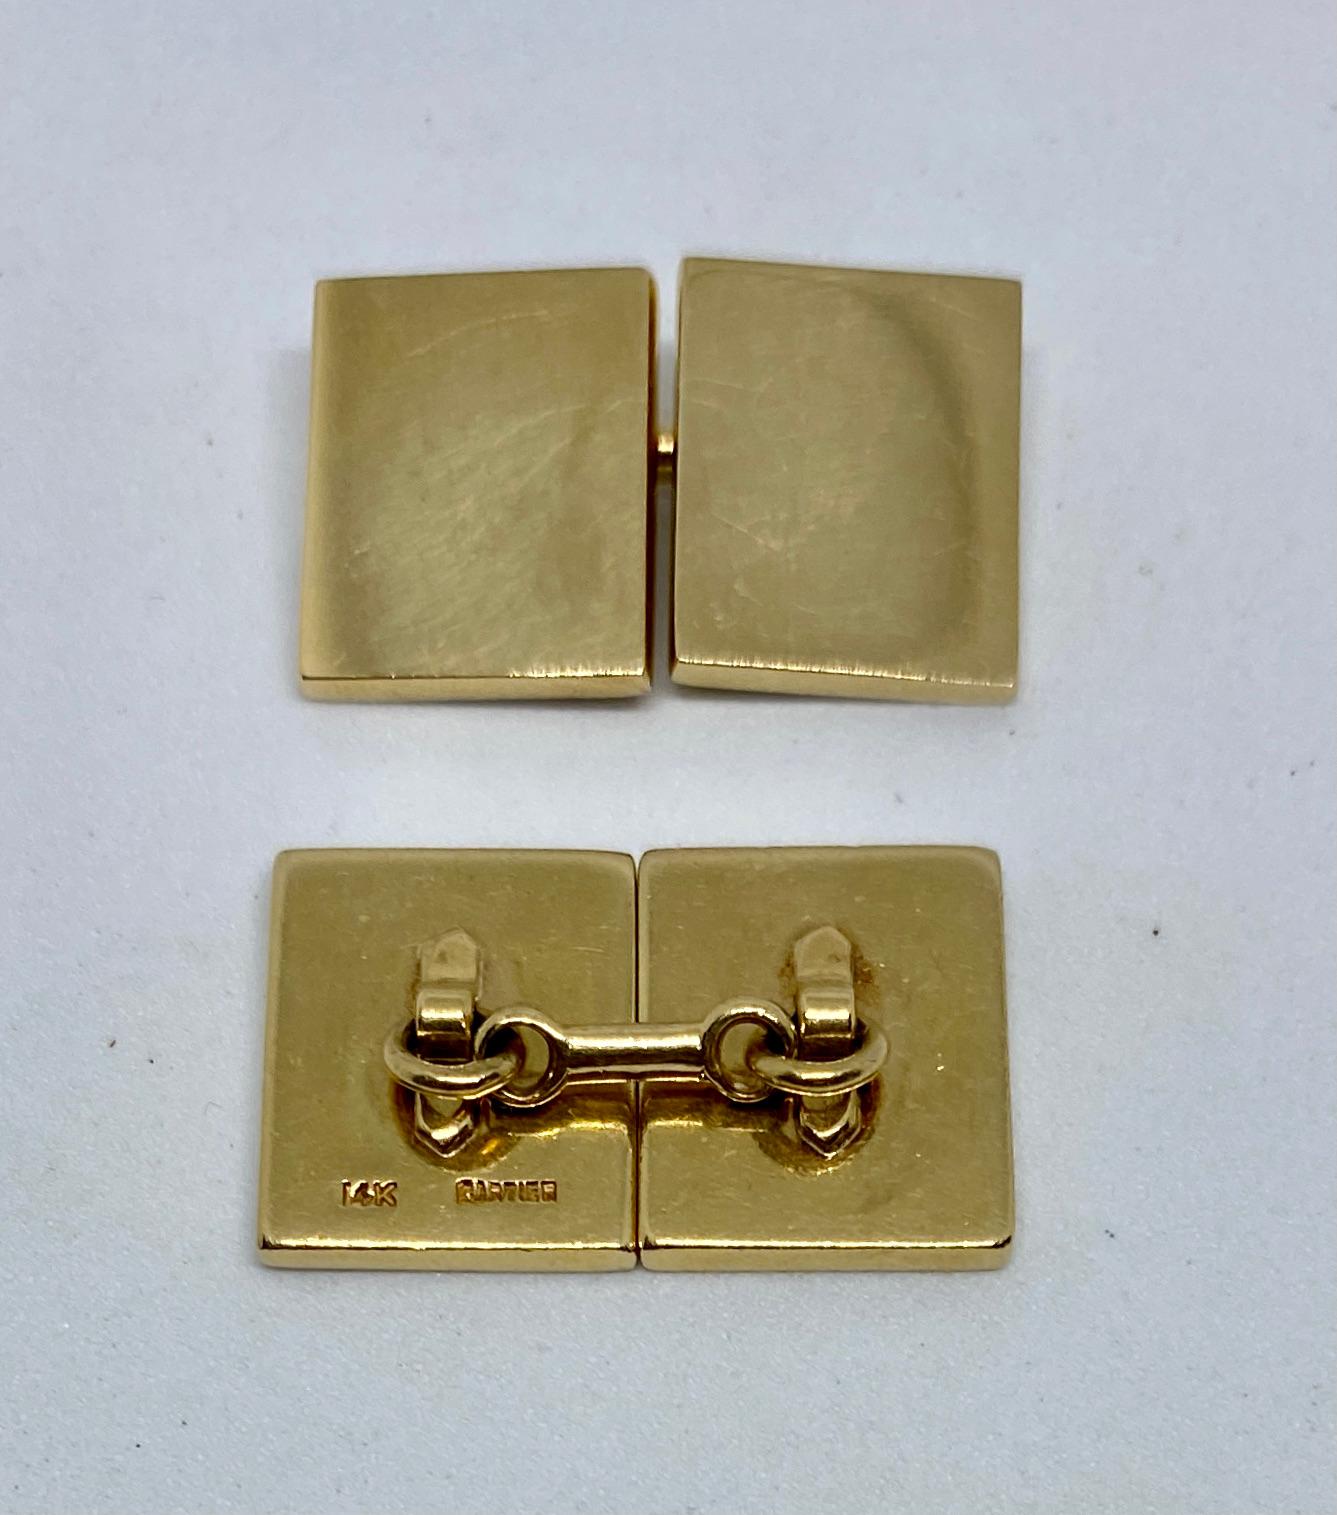 Contemporary Vintage Cartier Double-Sided Rectangular Cufflinks in Yellow Gold